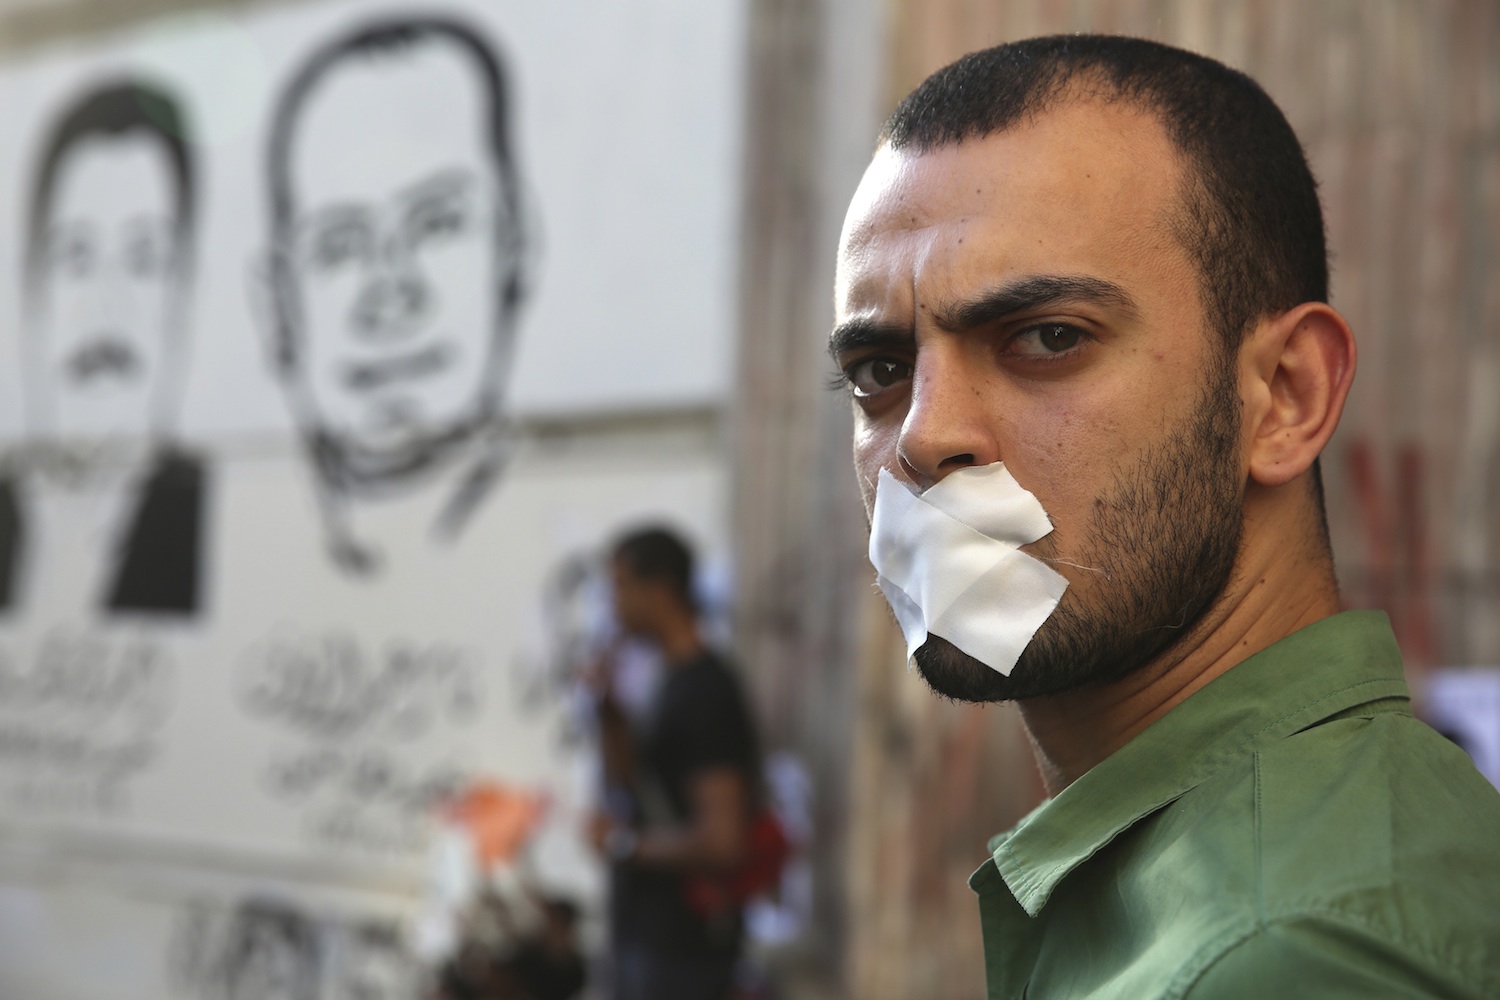 ﻿A protester rallies in support of journalists who were detained by Egyptian authorities, in front of the Press Syndicate in Cairo. June 1, 2014. (Photo: Reuters/Mohamed Abd El Ghany)